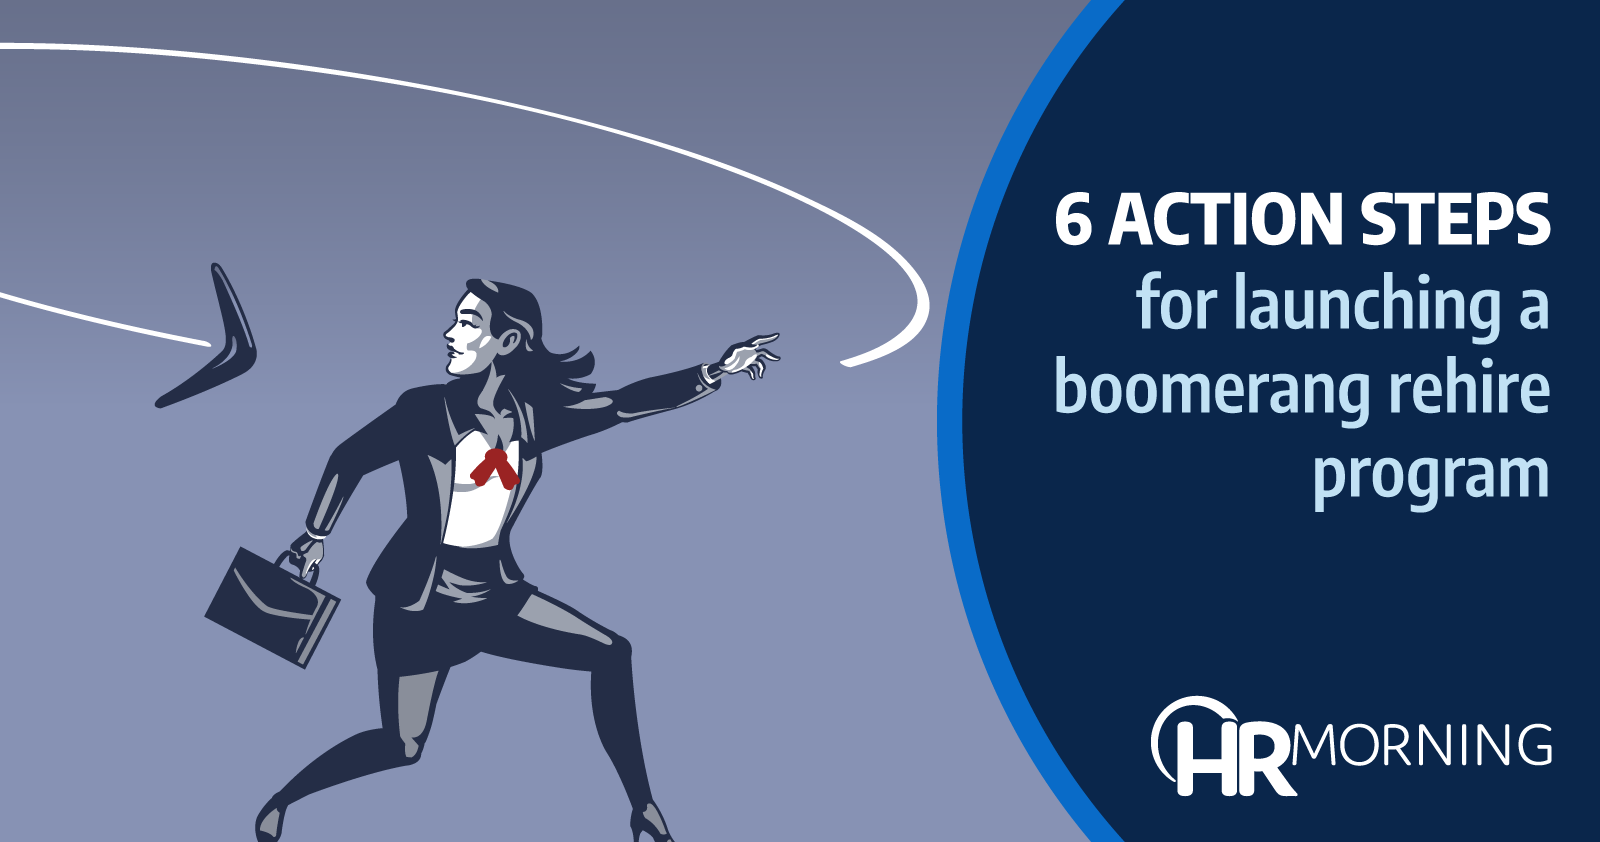 6 action steps for launching a boomerang rehire program